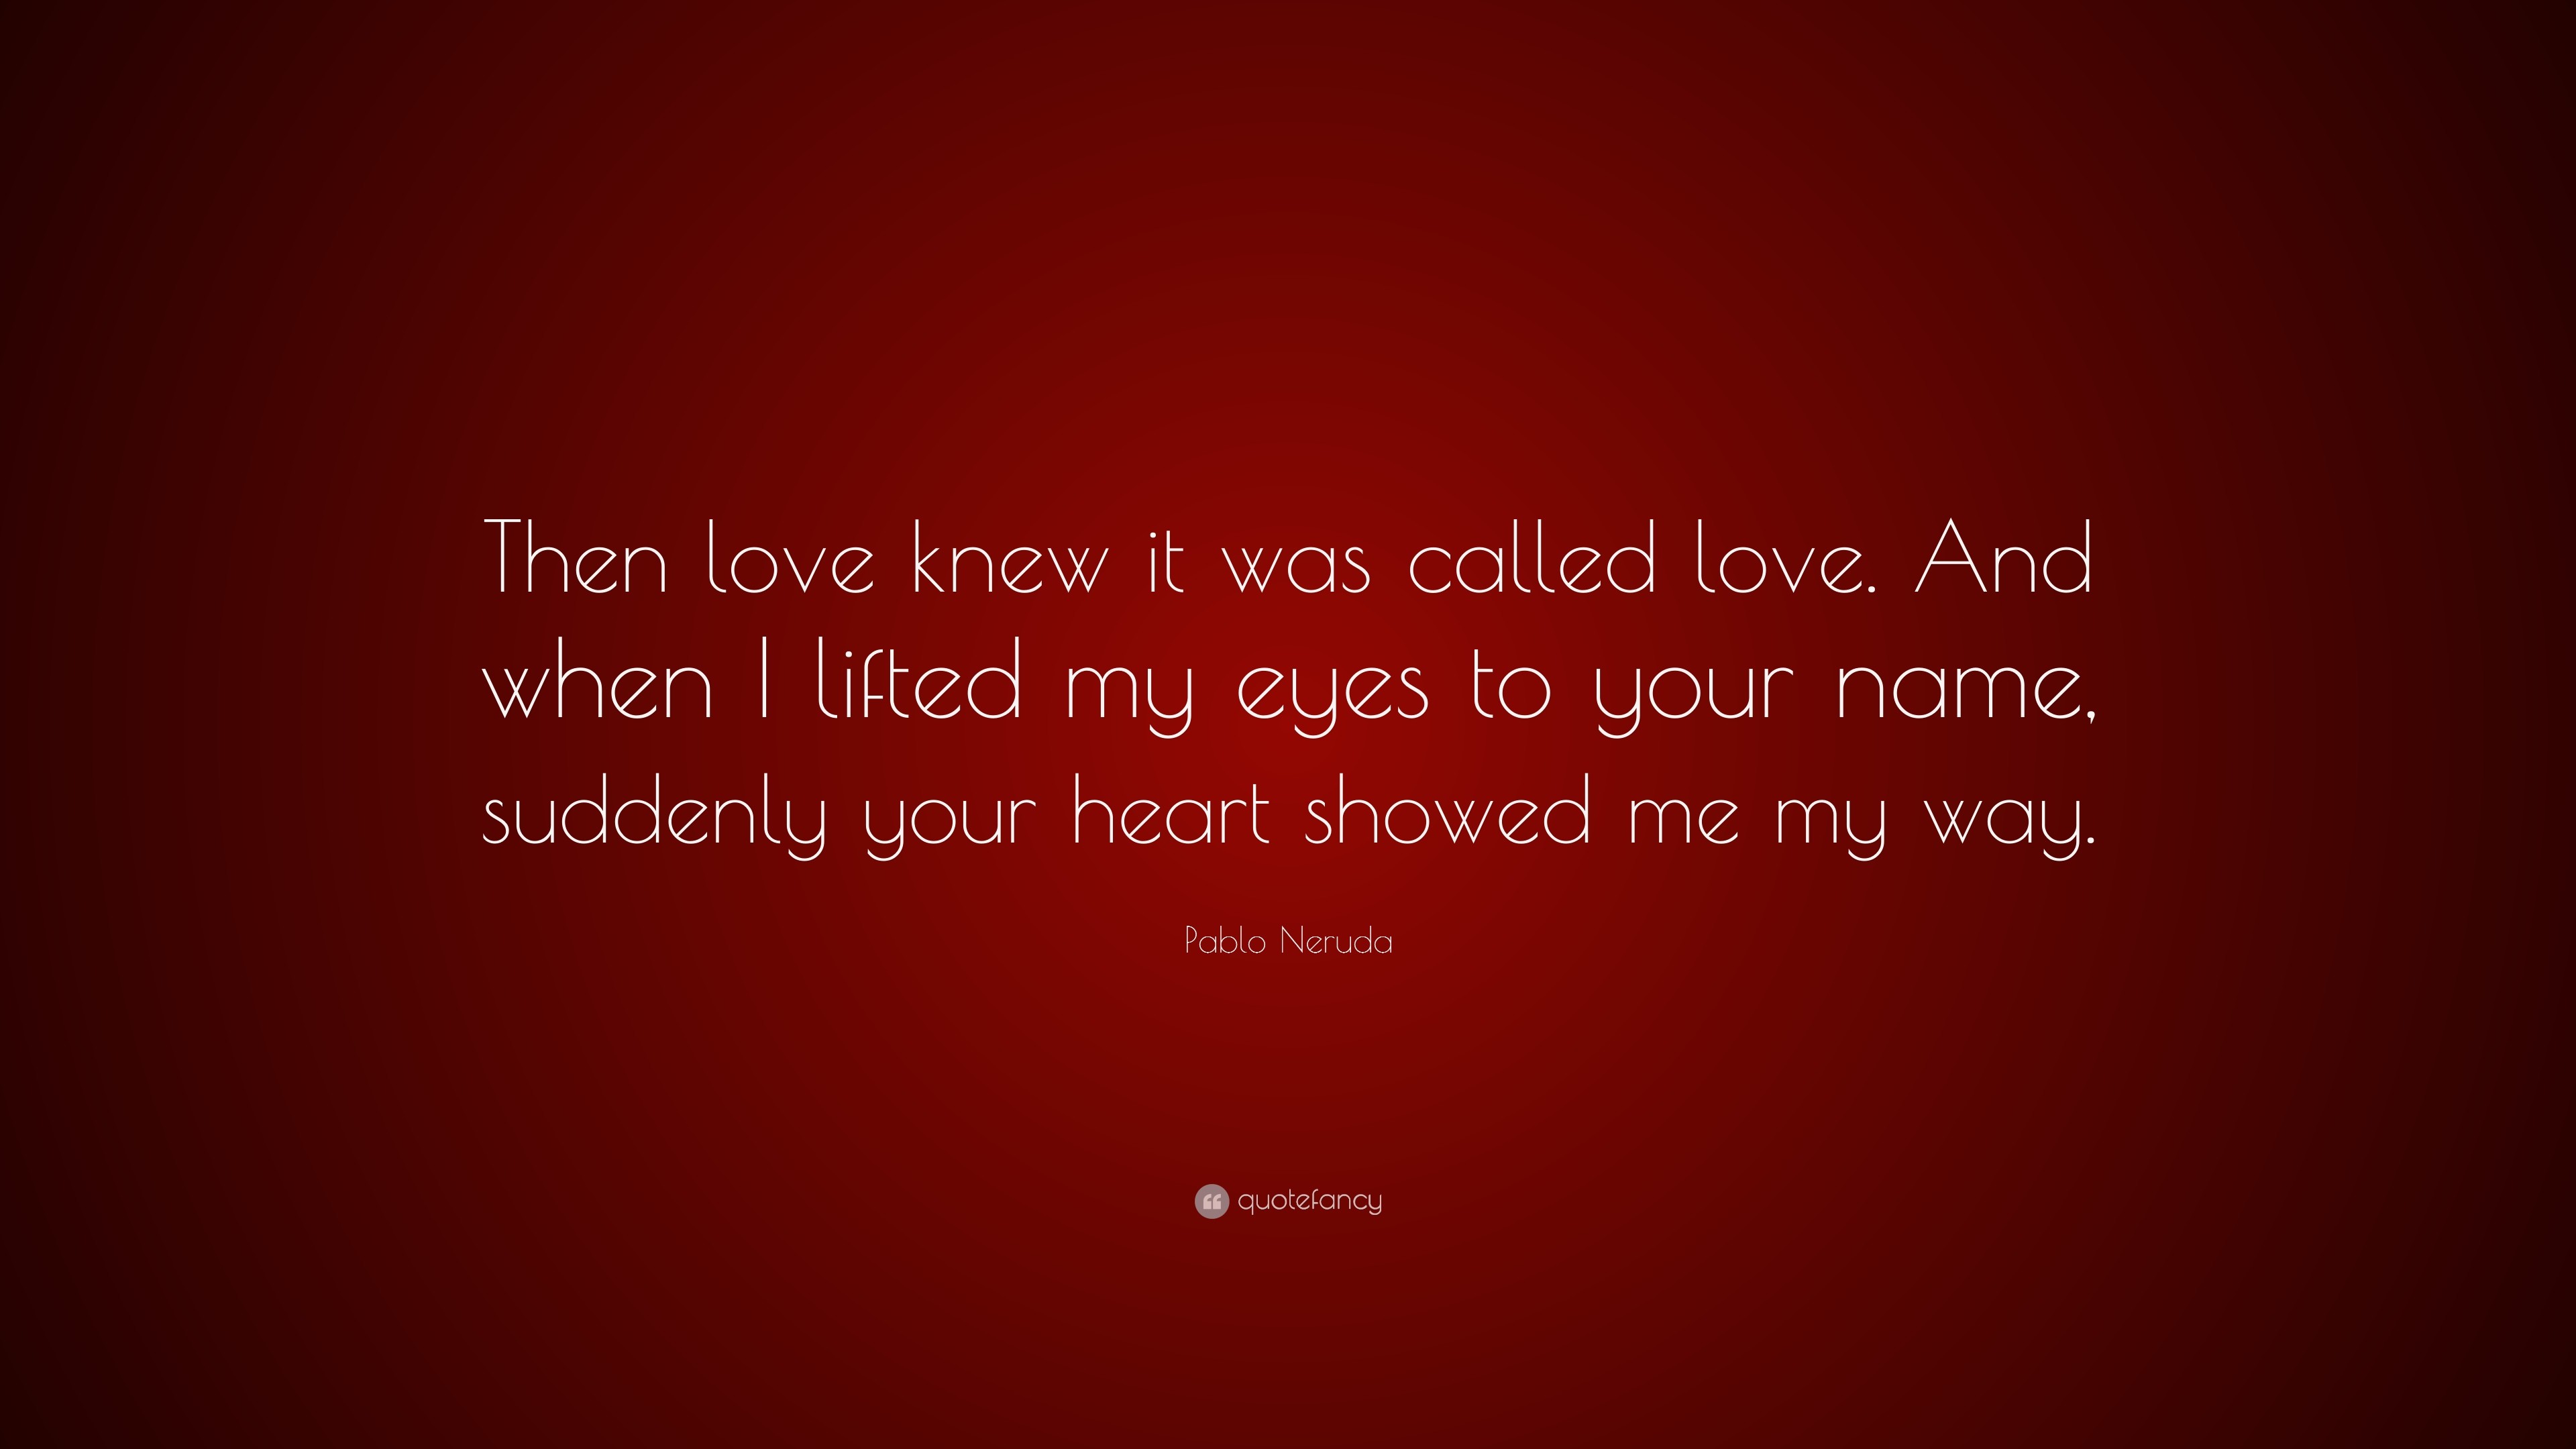 Pablo Neruda Quote Then love knew it was called love. And when I